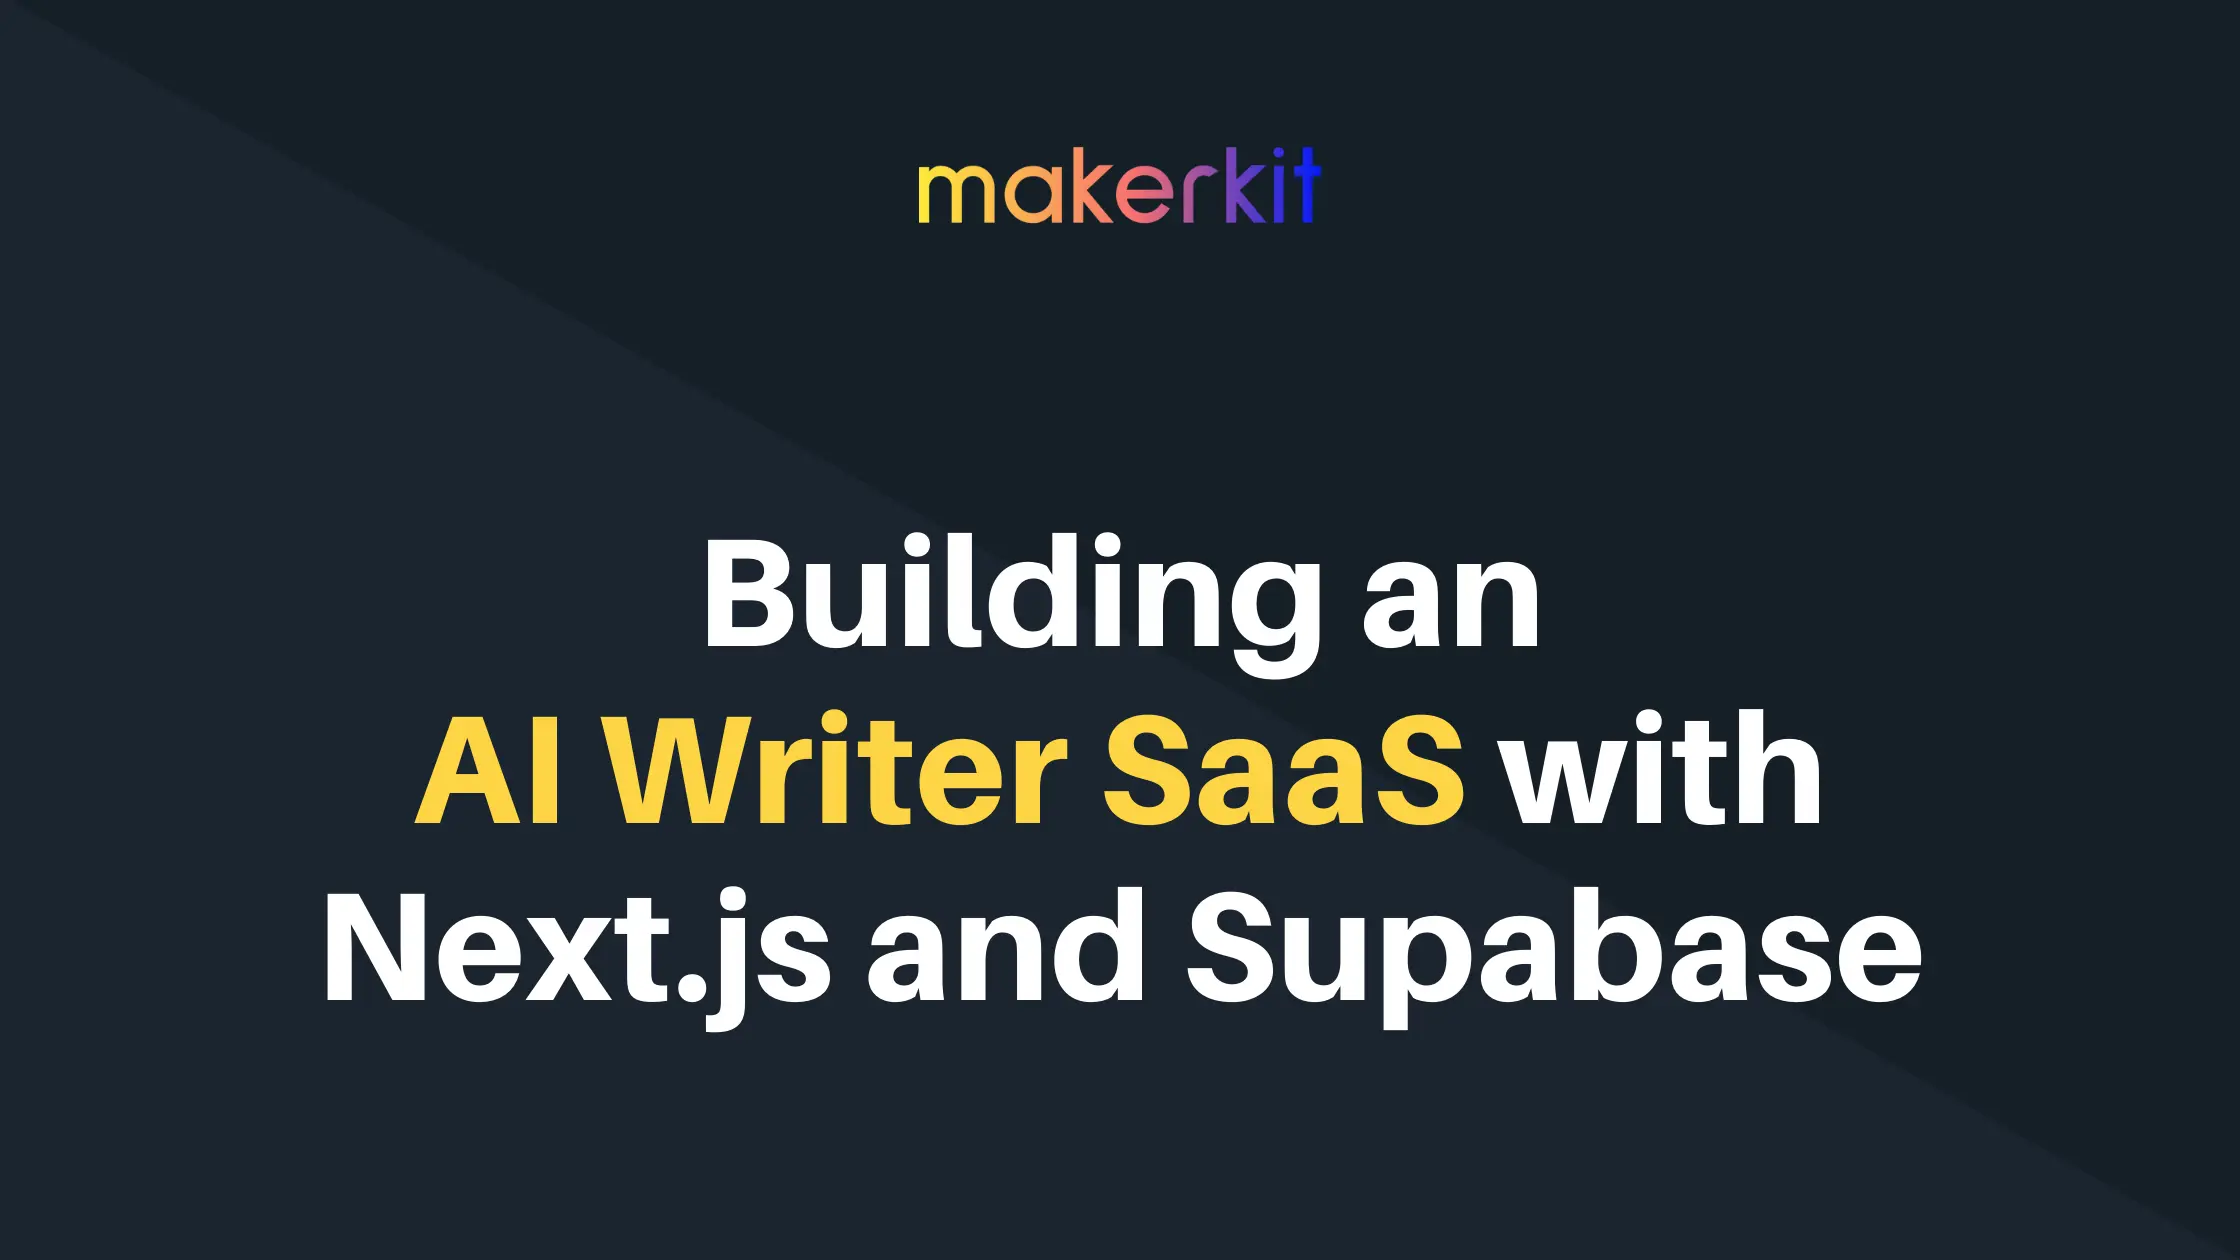 Cover Image for Building an AI Writer SaaS with Next.js and Supabase